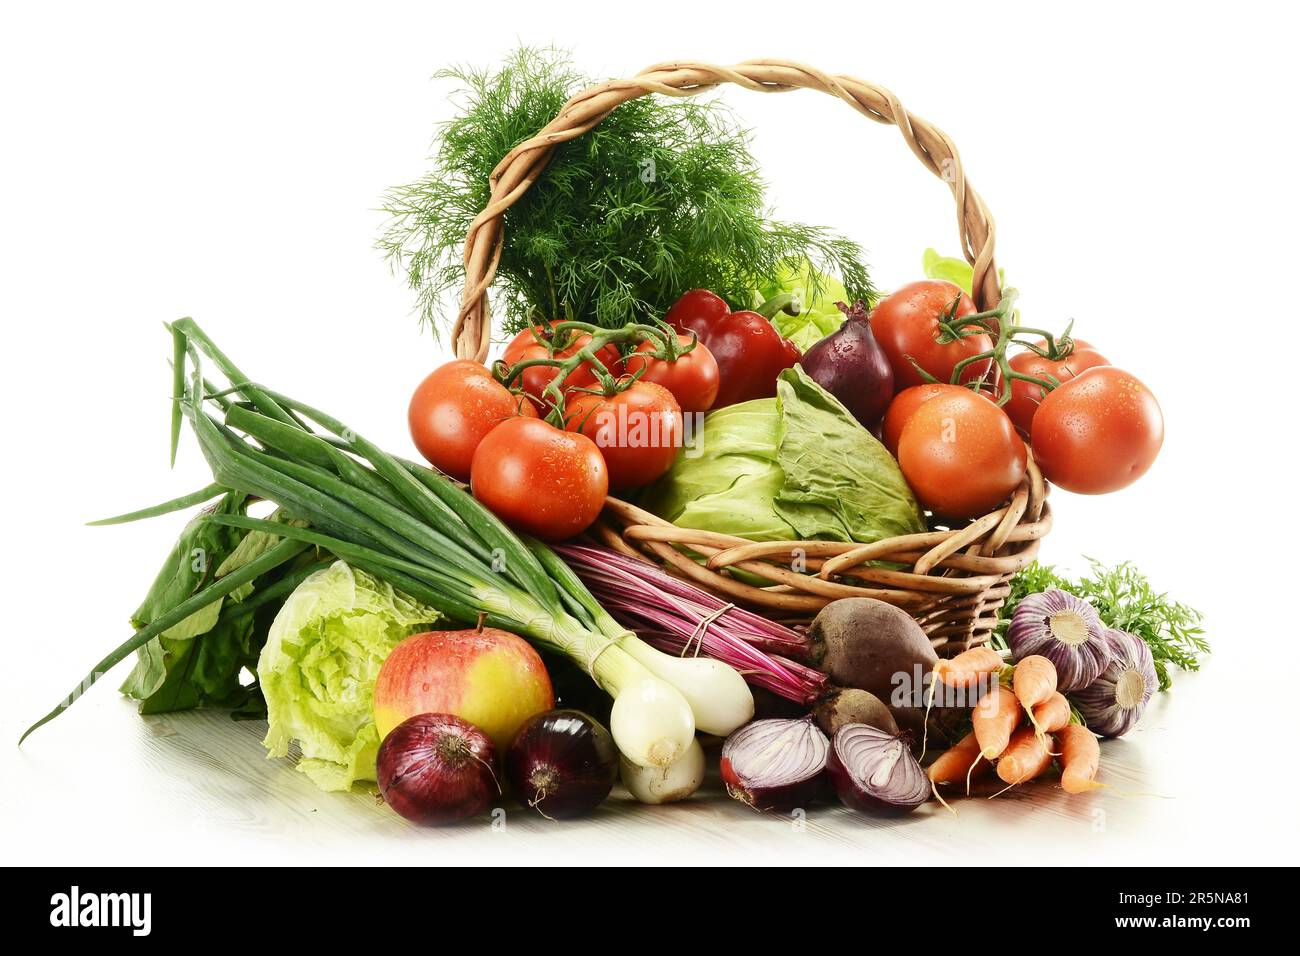 Composition with raw vegetables and wicker basket isolated on white Stock Photo